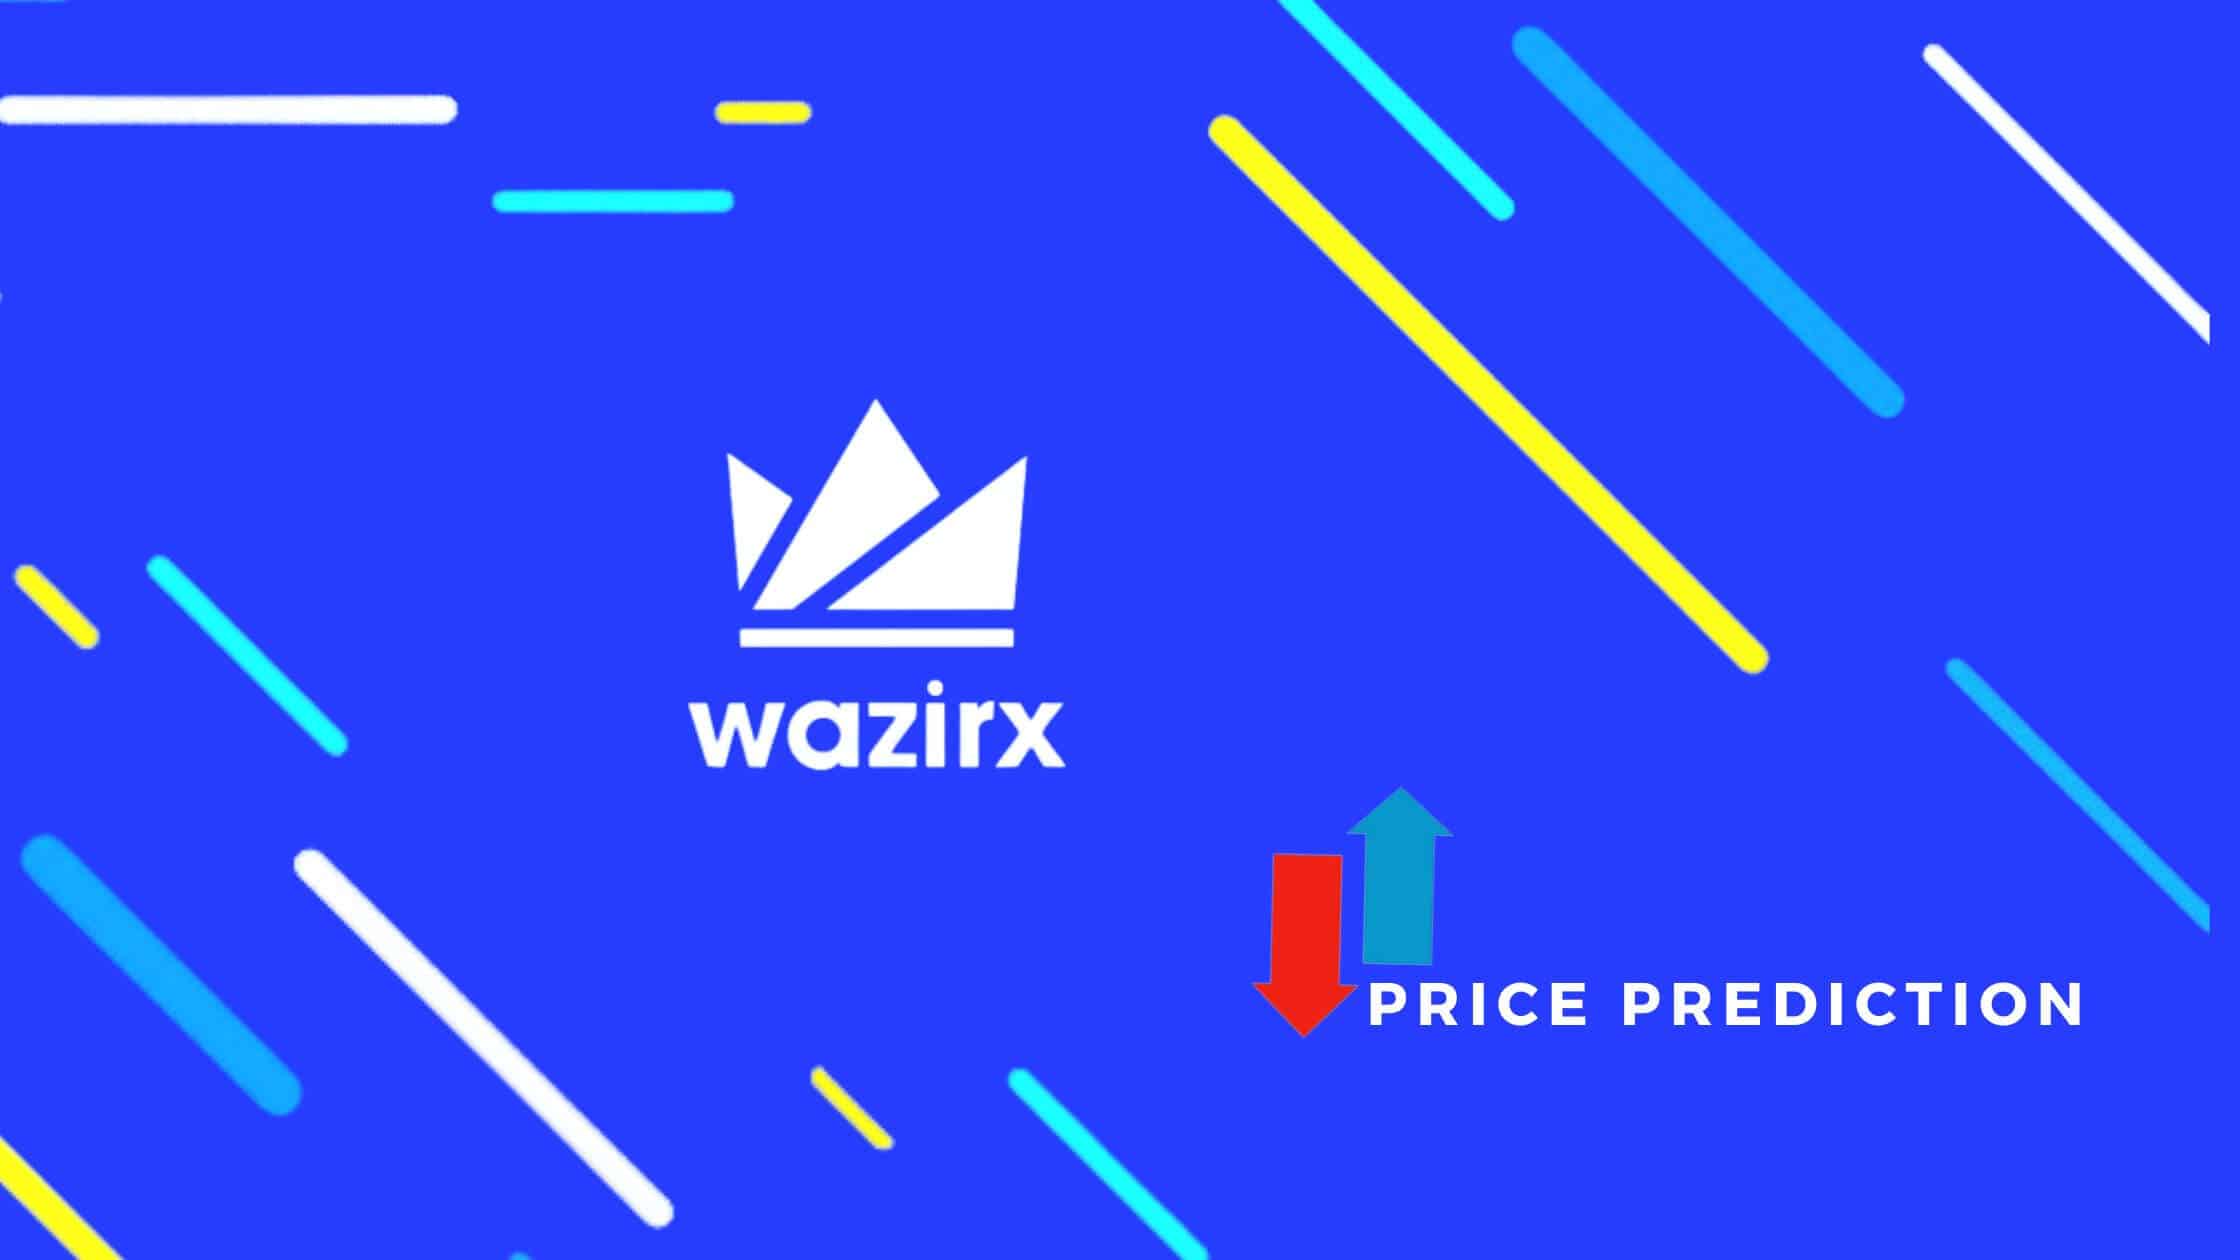 Price Prediction For Wazirx (Wrx) In 2022, 2025, And 2030 Can I Invest